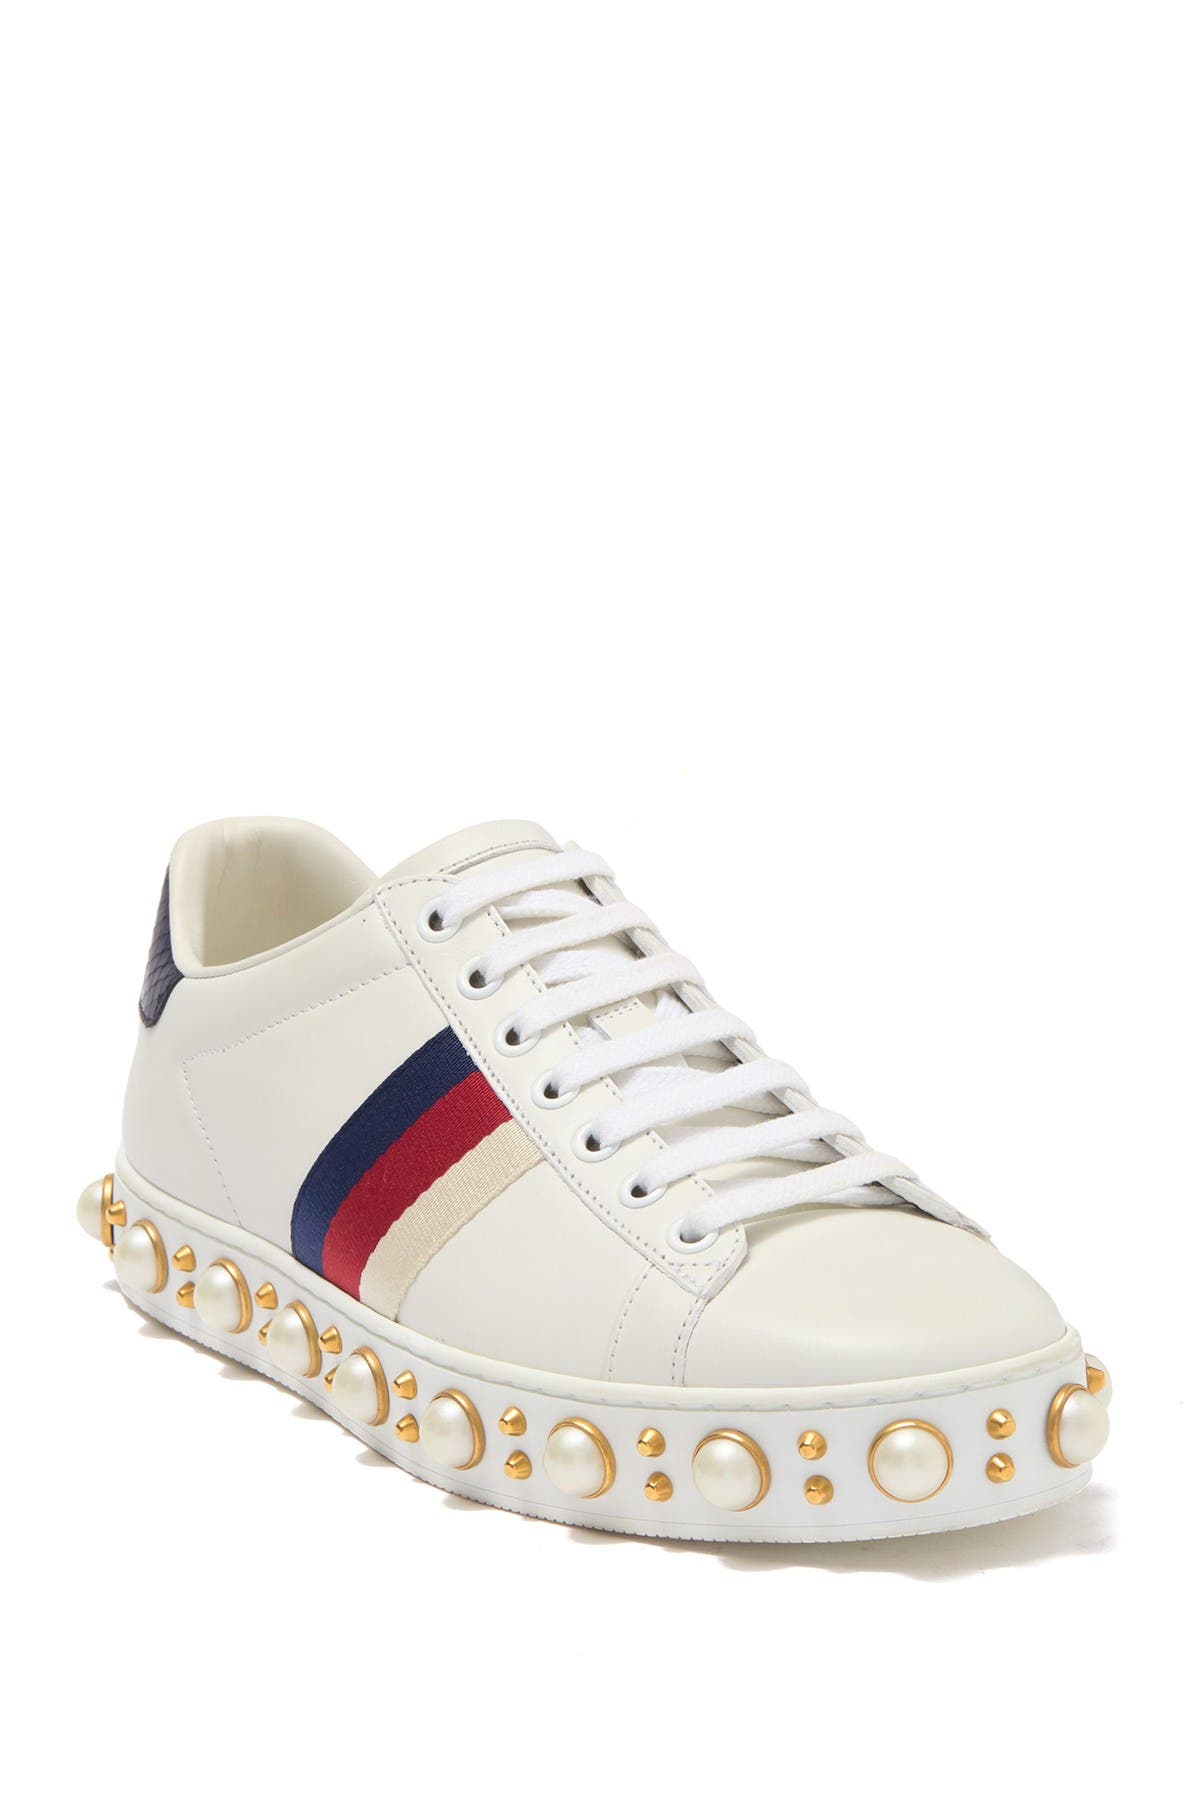 gucci sneakers with pearls